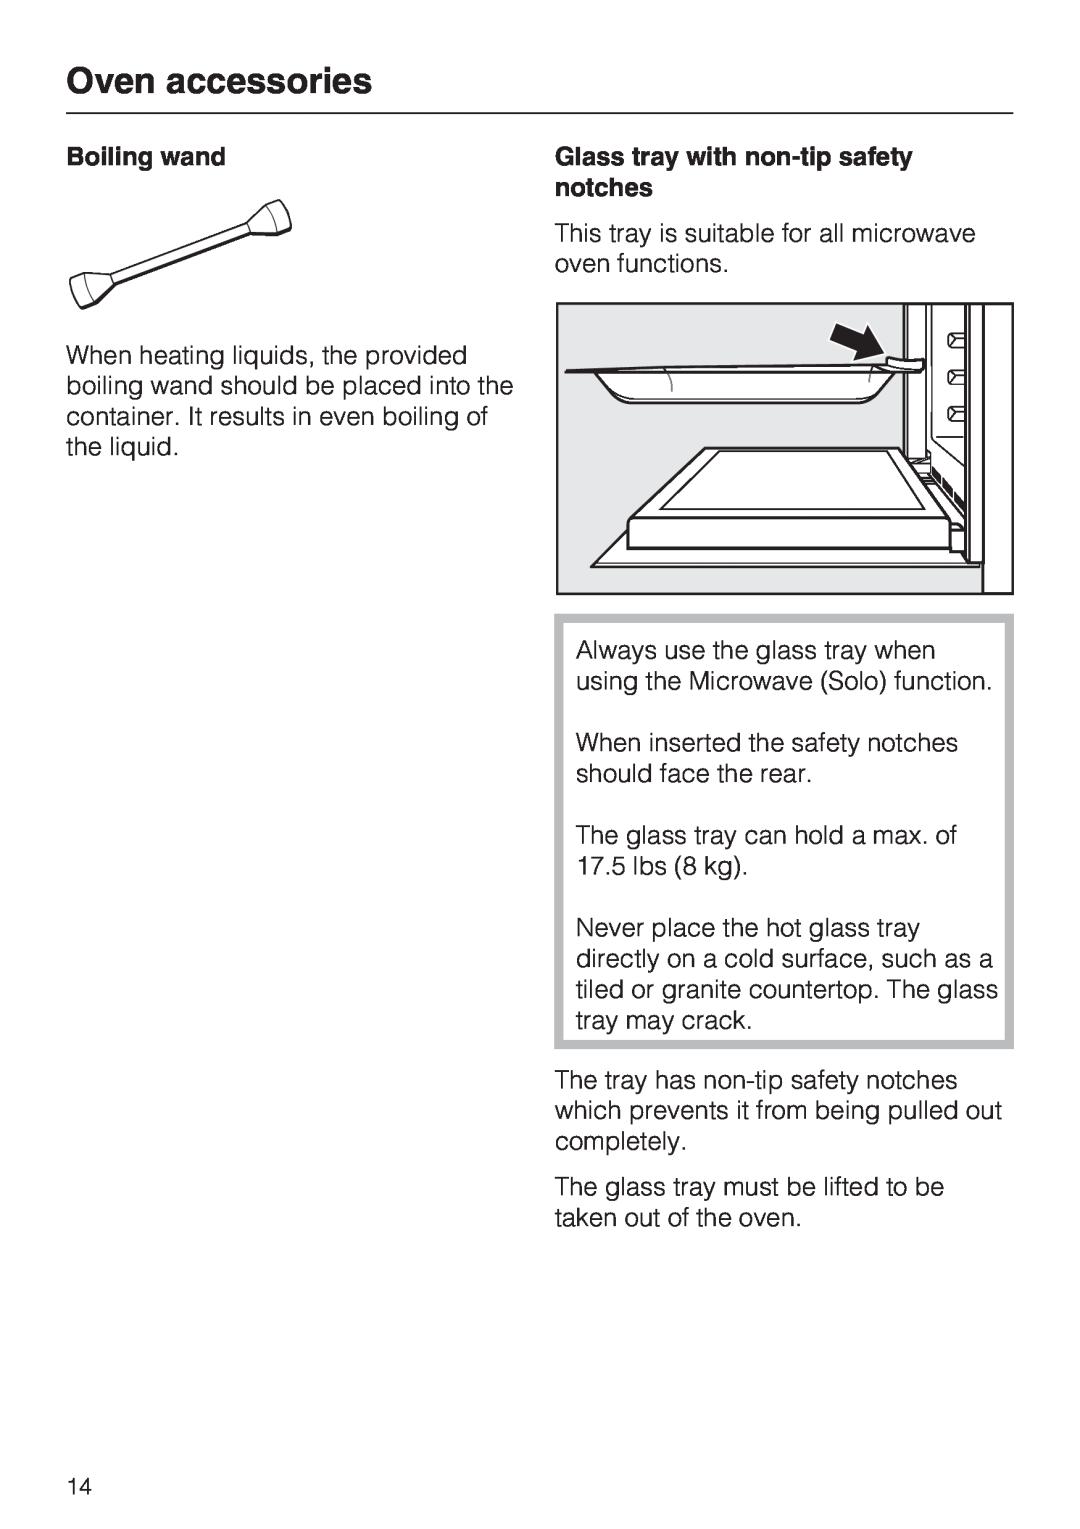 Miele H 4044 BM installation instructions Oven accessories, Boiling wand, Glass tray with non-tip safety notches 